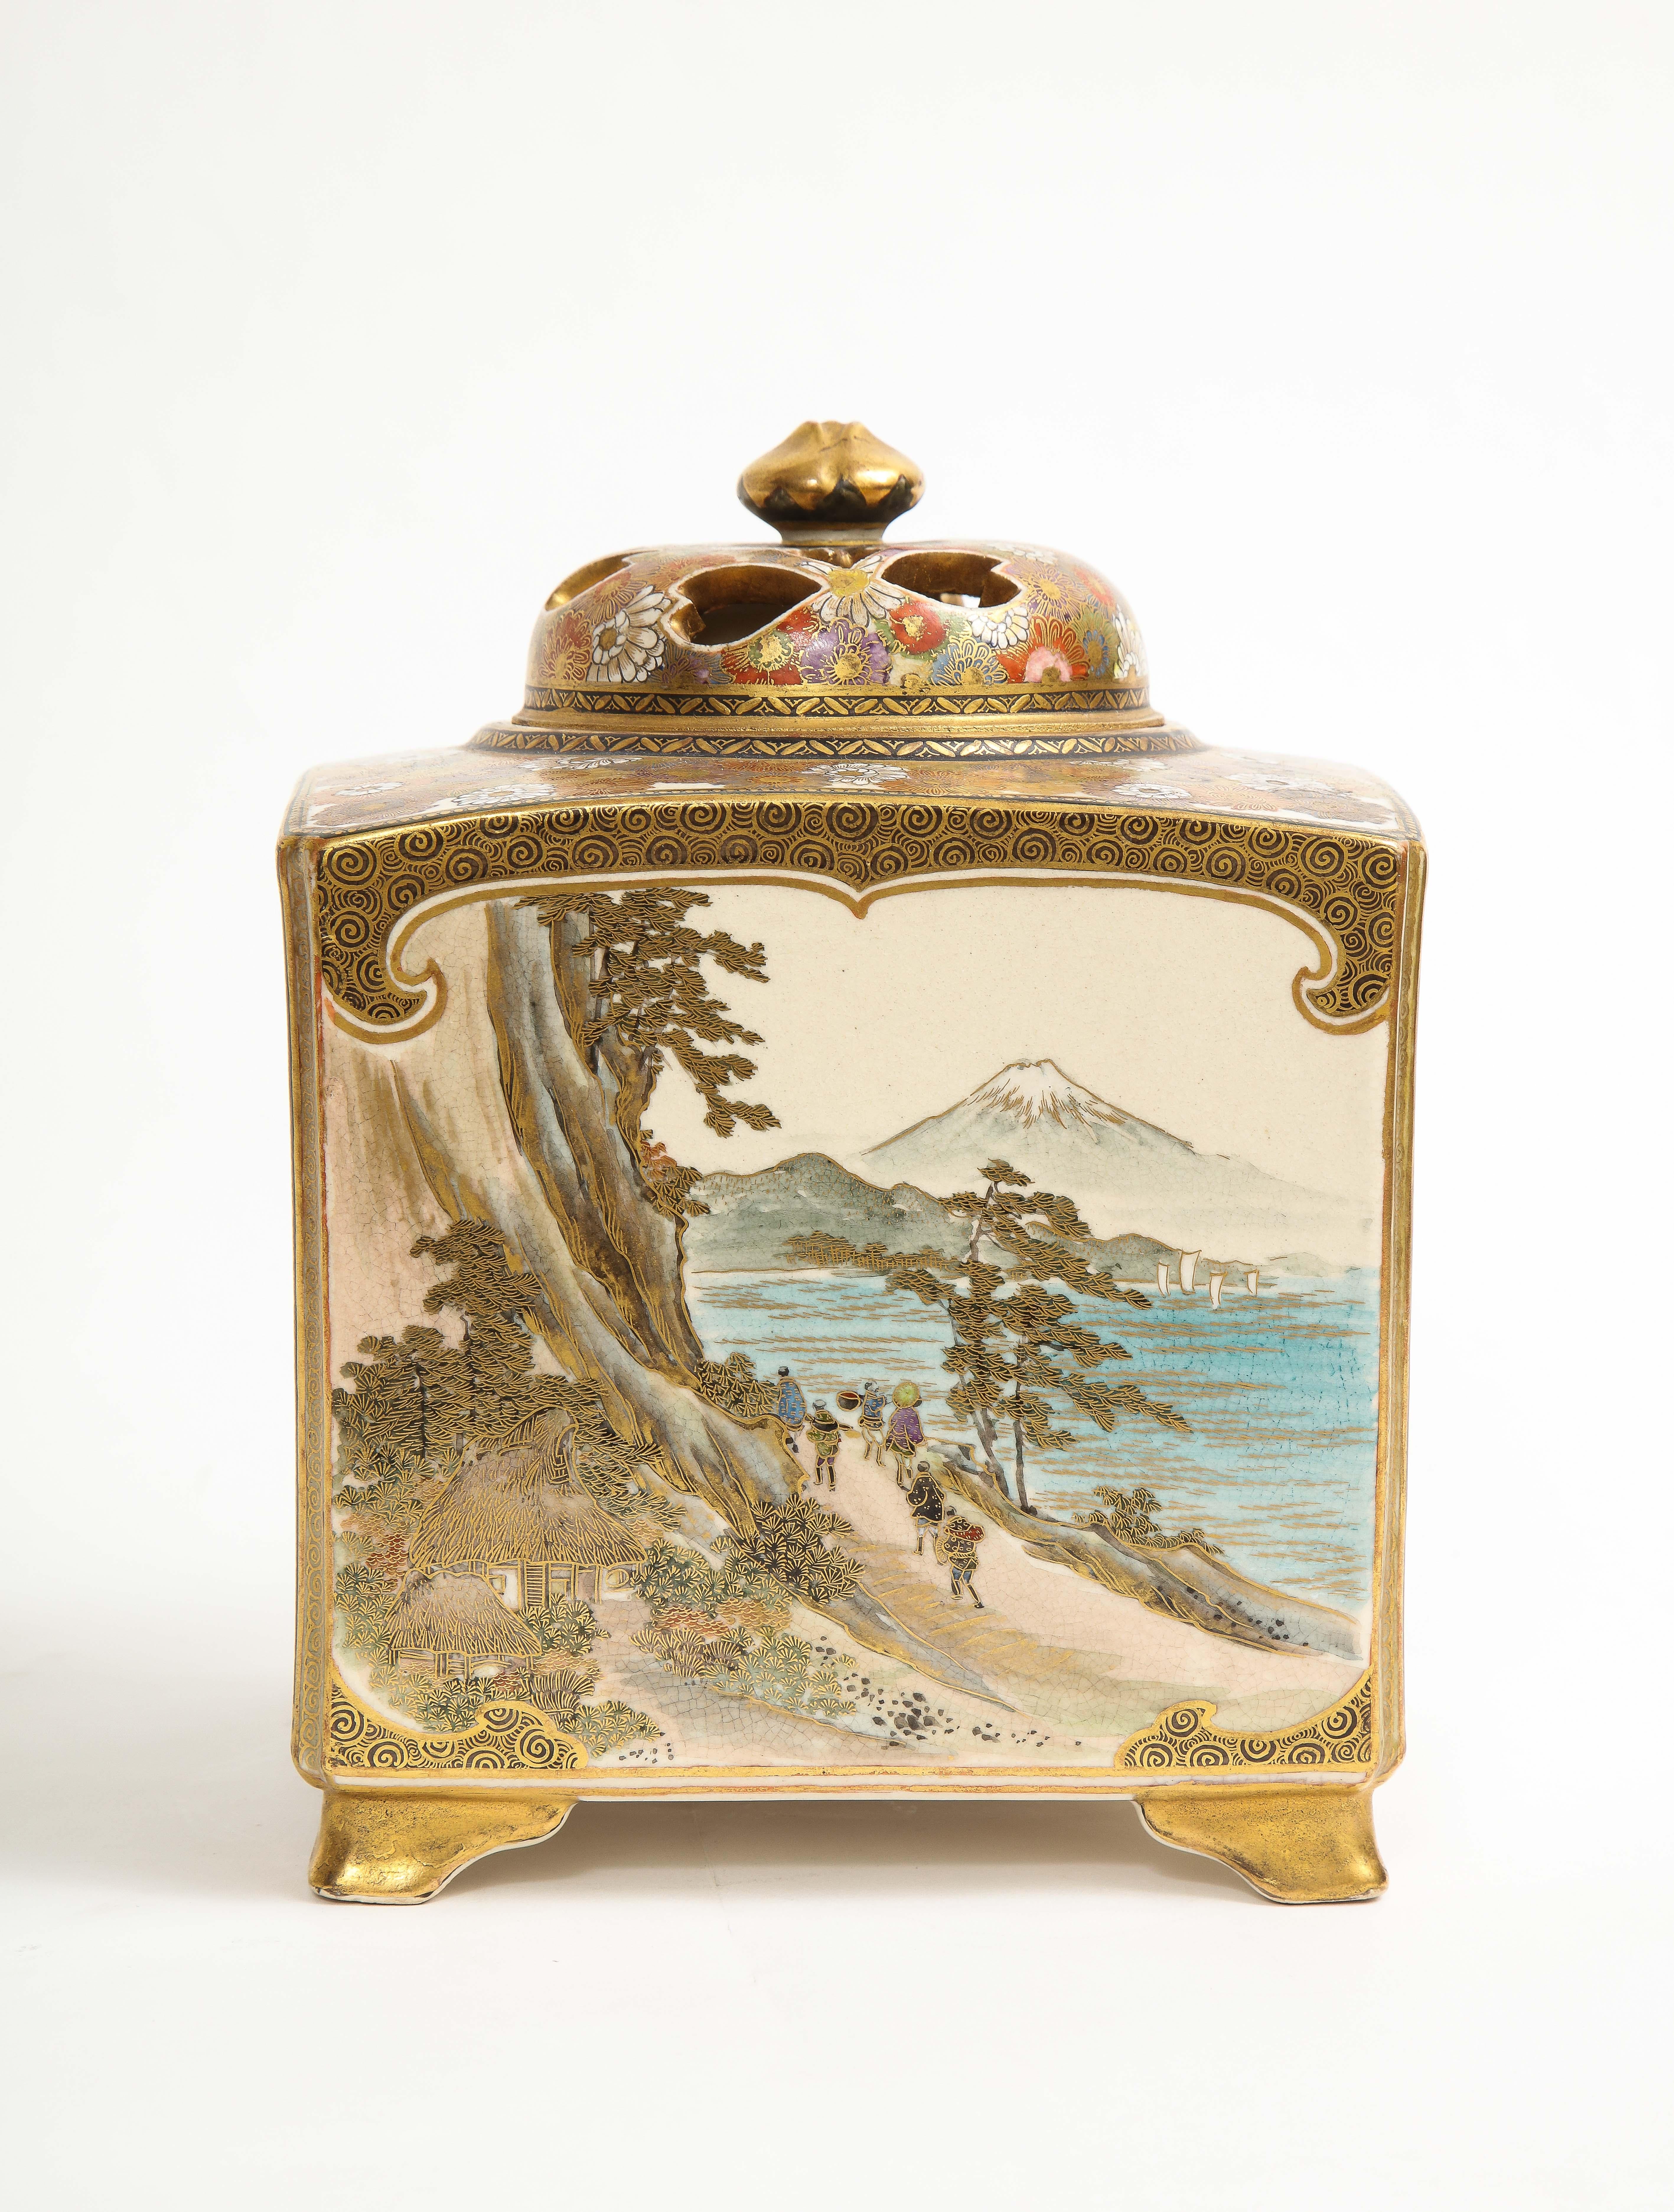 Porcelain A Japanese Meiji Period (1868-1912).Large Satsuma Square Censer And Cover, Mark